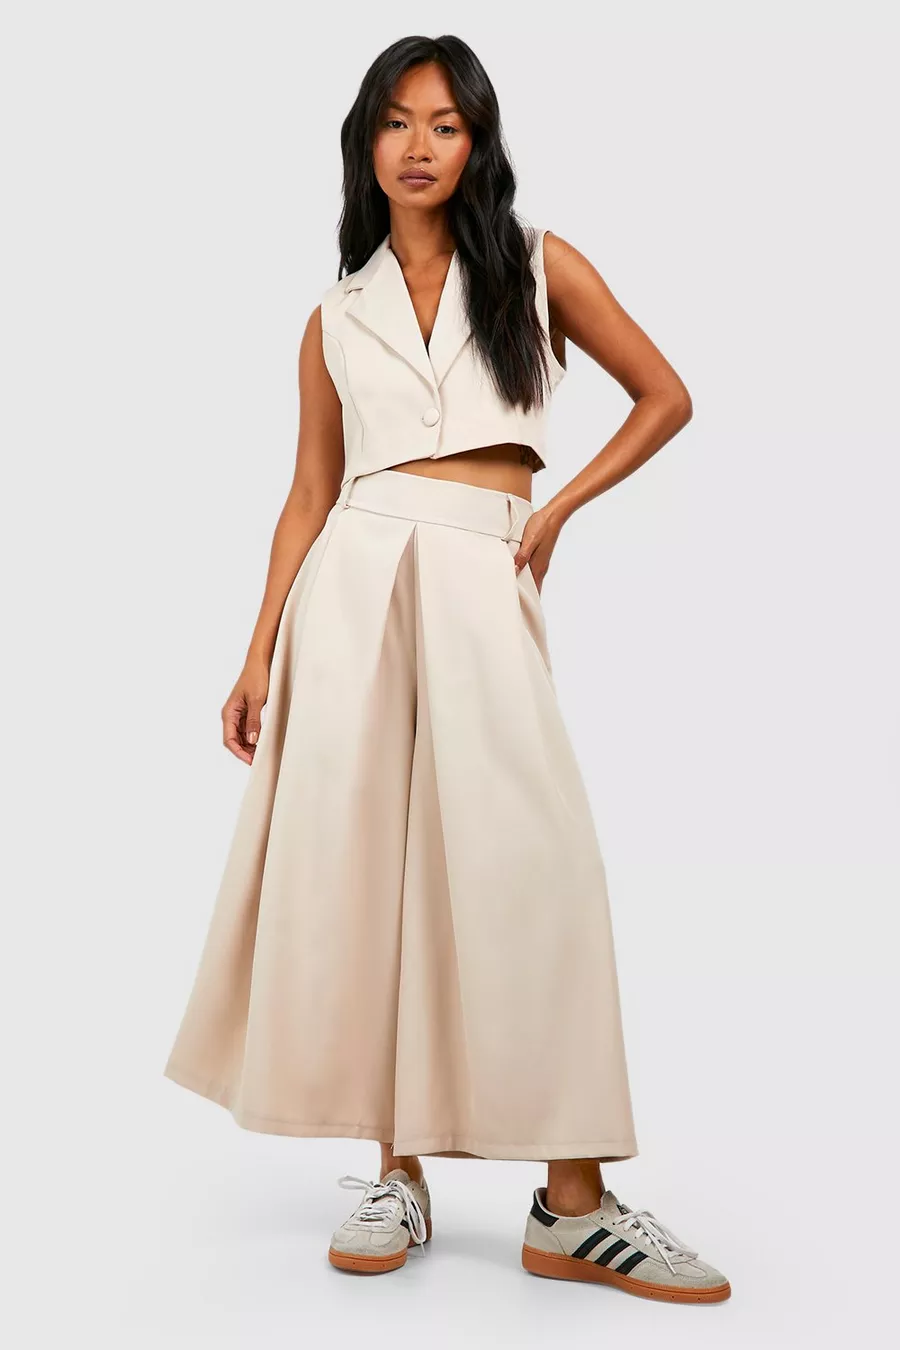 “Culottes Commandments: Essential Tips for Flawless Culottes Styling”